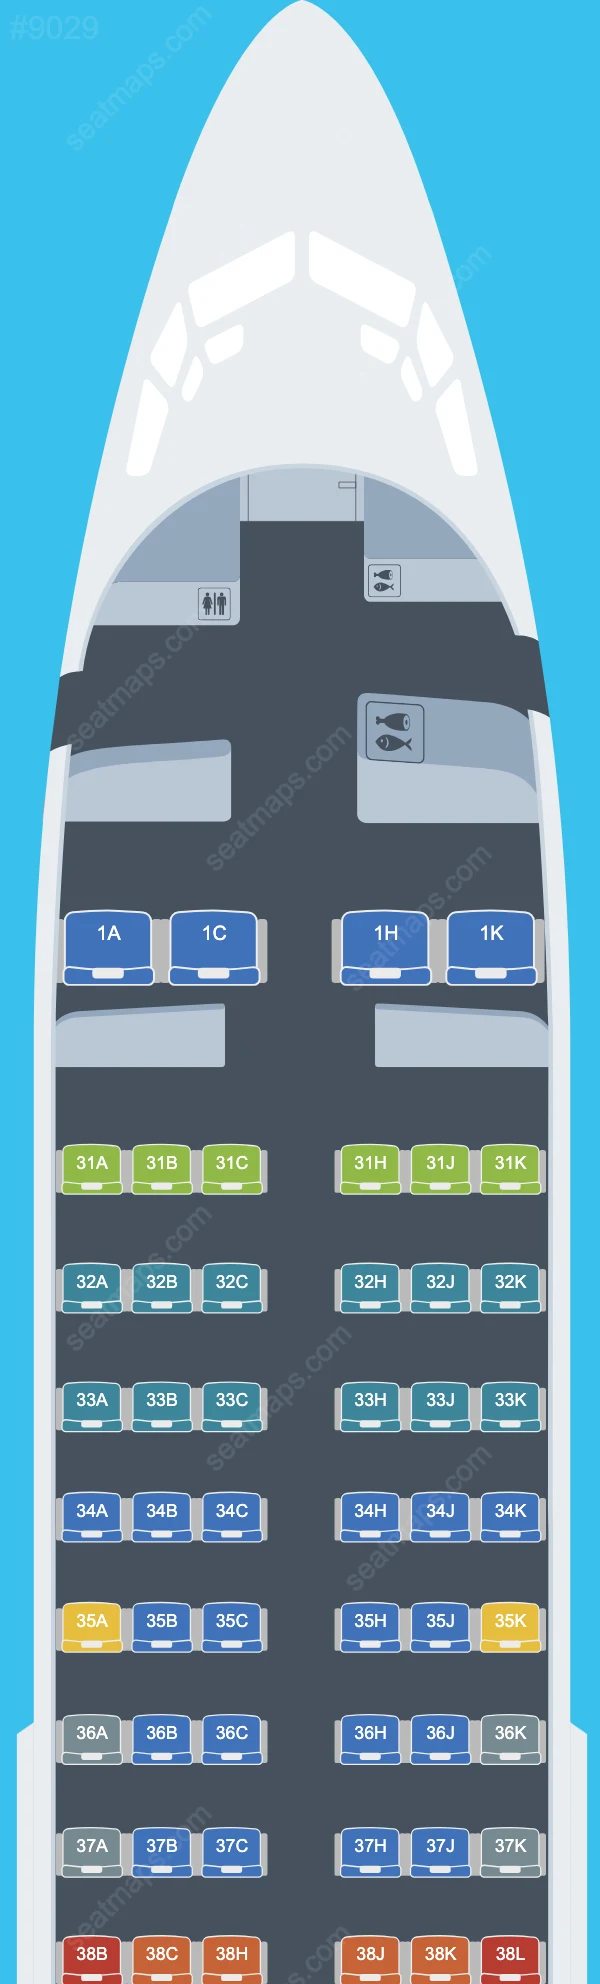 China Southern Boeing 737 Seat Maps 737-700 V.1